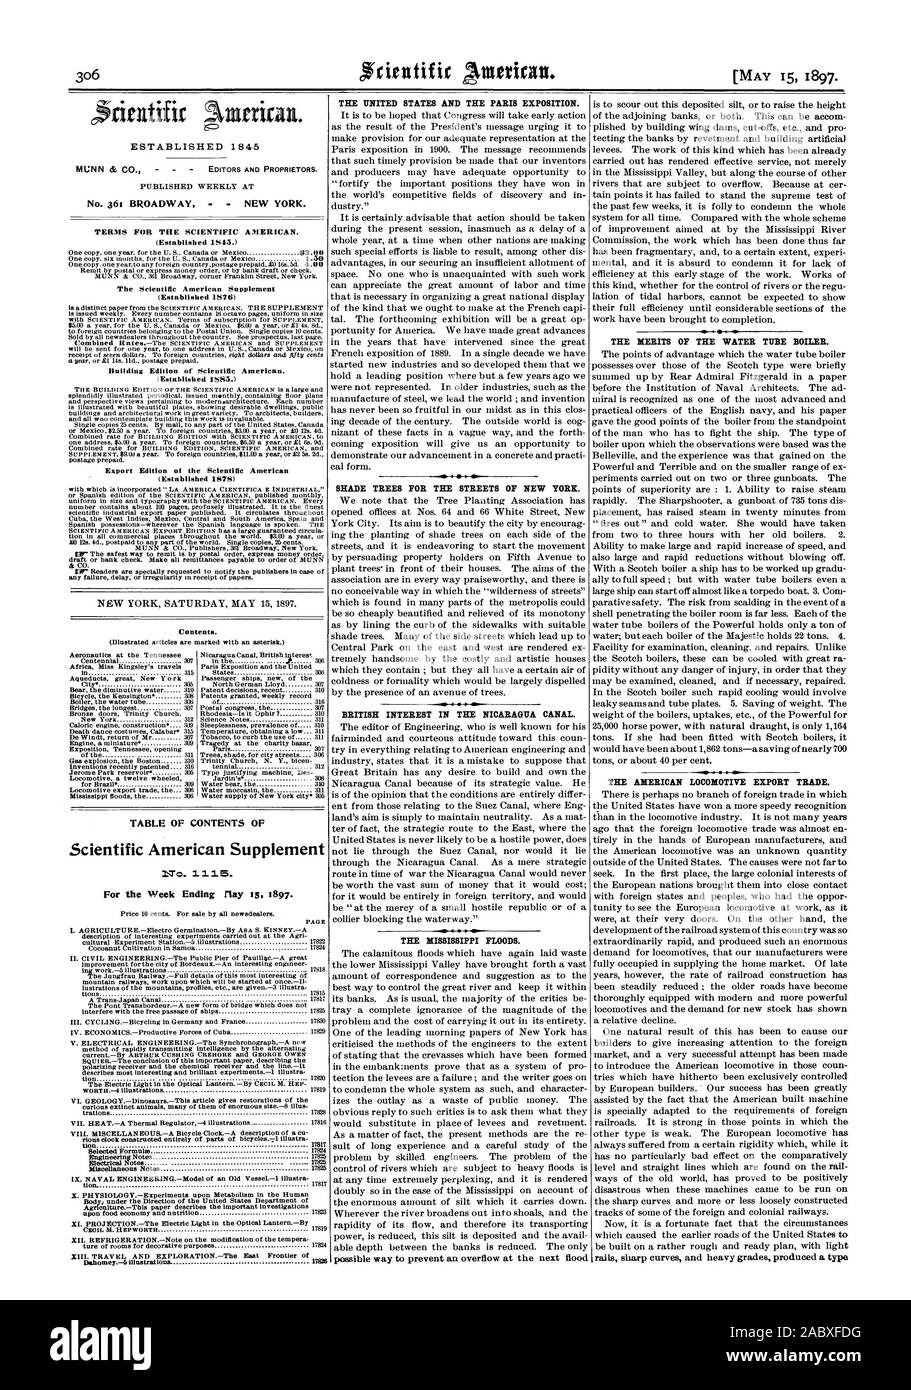 Week Ending flay 15 1897. THE UNITED STATES AND THE PARIS EXPOSITION. SHADE TREES FOR THE STREETS OF NEW YORK. BRITISH INTEREST IN THE NICARAGUA CANAL. THE MISSISSIPPI FLOODS. possible way to prevent an overflow at the next flood THE MERITS OF THE WATER TUBE BOILER. THE AMERICAN LOCOMOTIVE EXPORT TRADE. rails sharp curves and heavy grades produced a type NEW YORK SATURDAY MAY 15 1897. TABLE OF CONTENTS OF ESTABLISHED 1 845, scientific american, 1897-05-15 Stock Photo